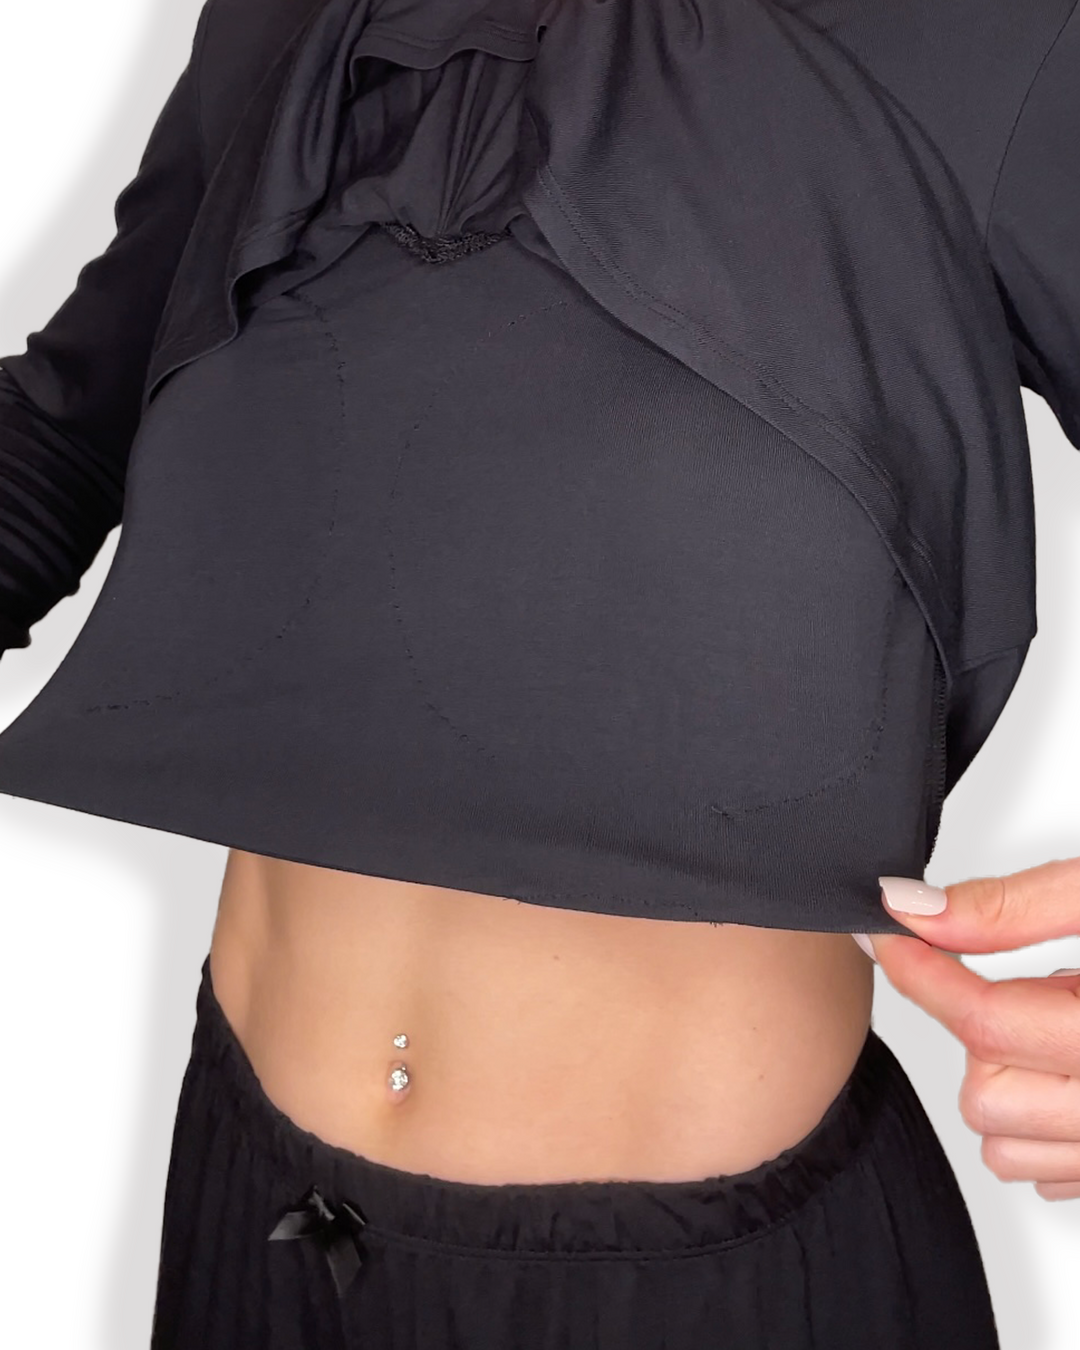 Breathable Braless Bamboo Long Sleeve Top in Black color